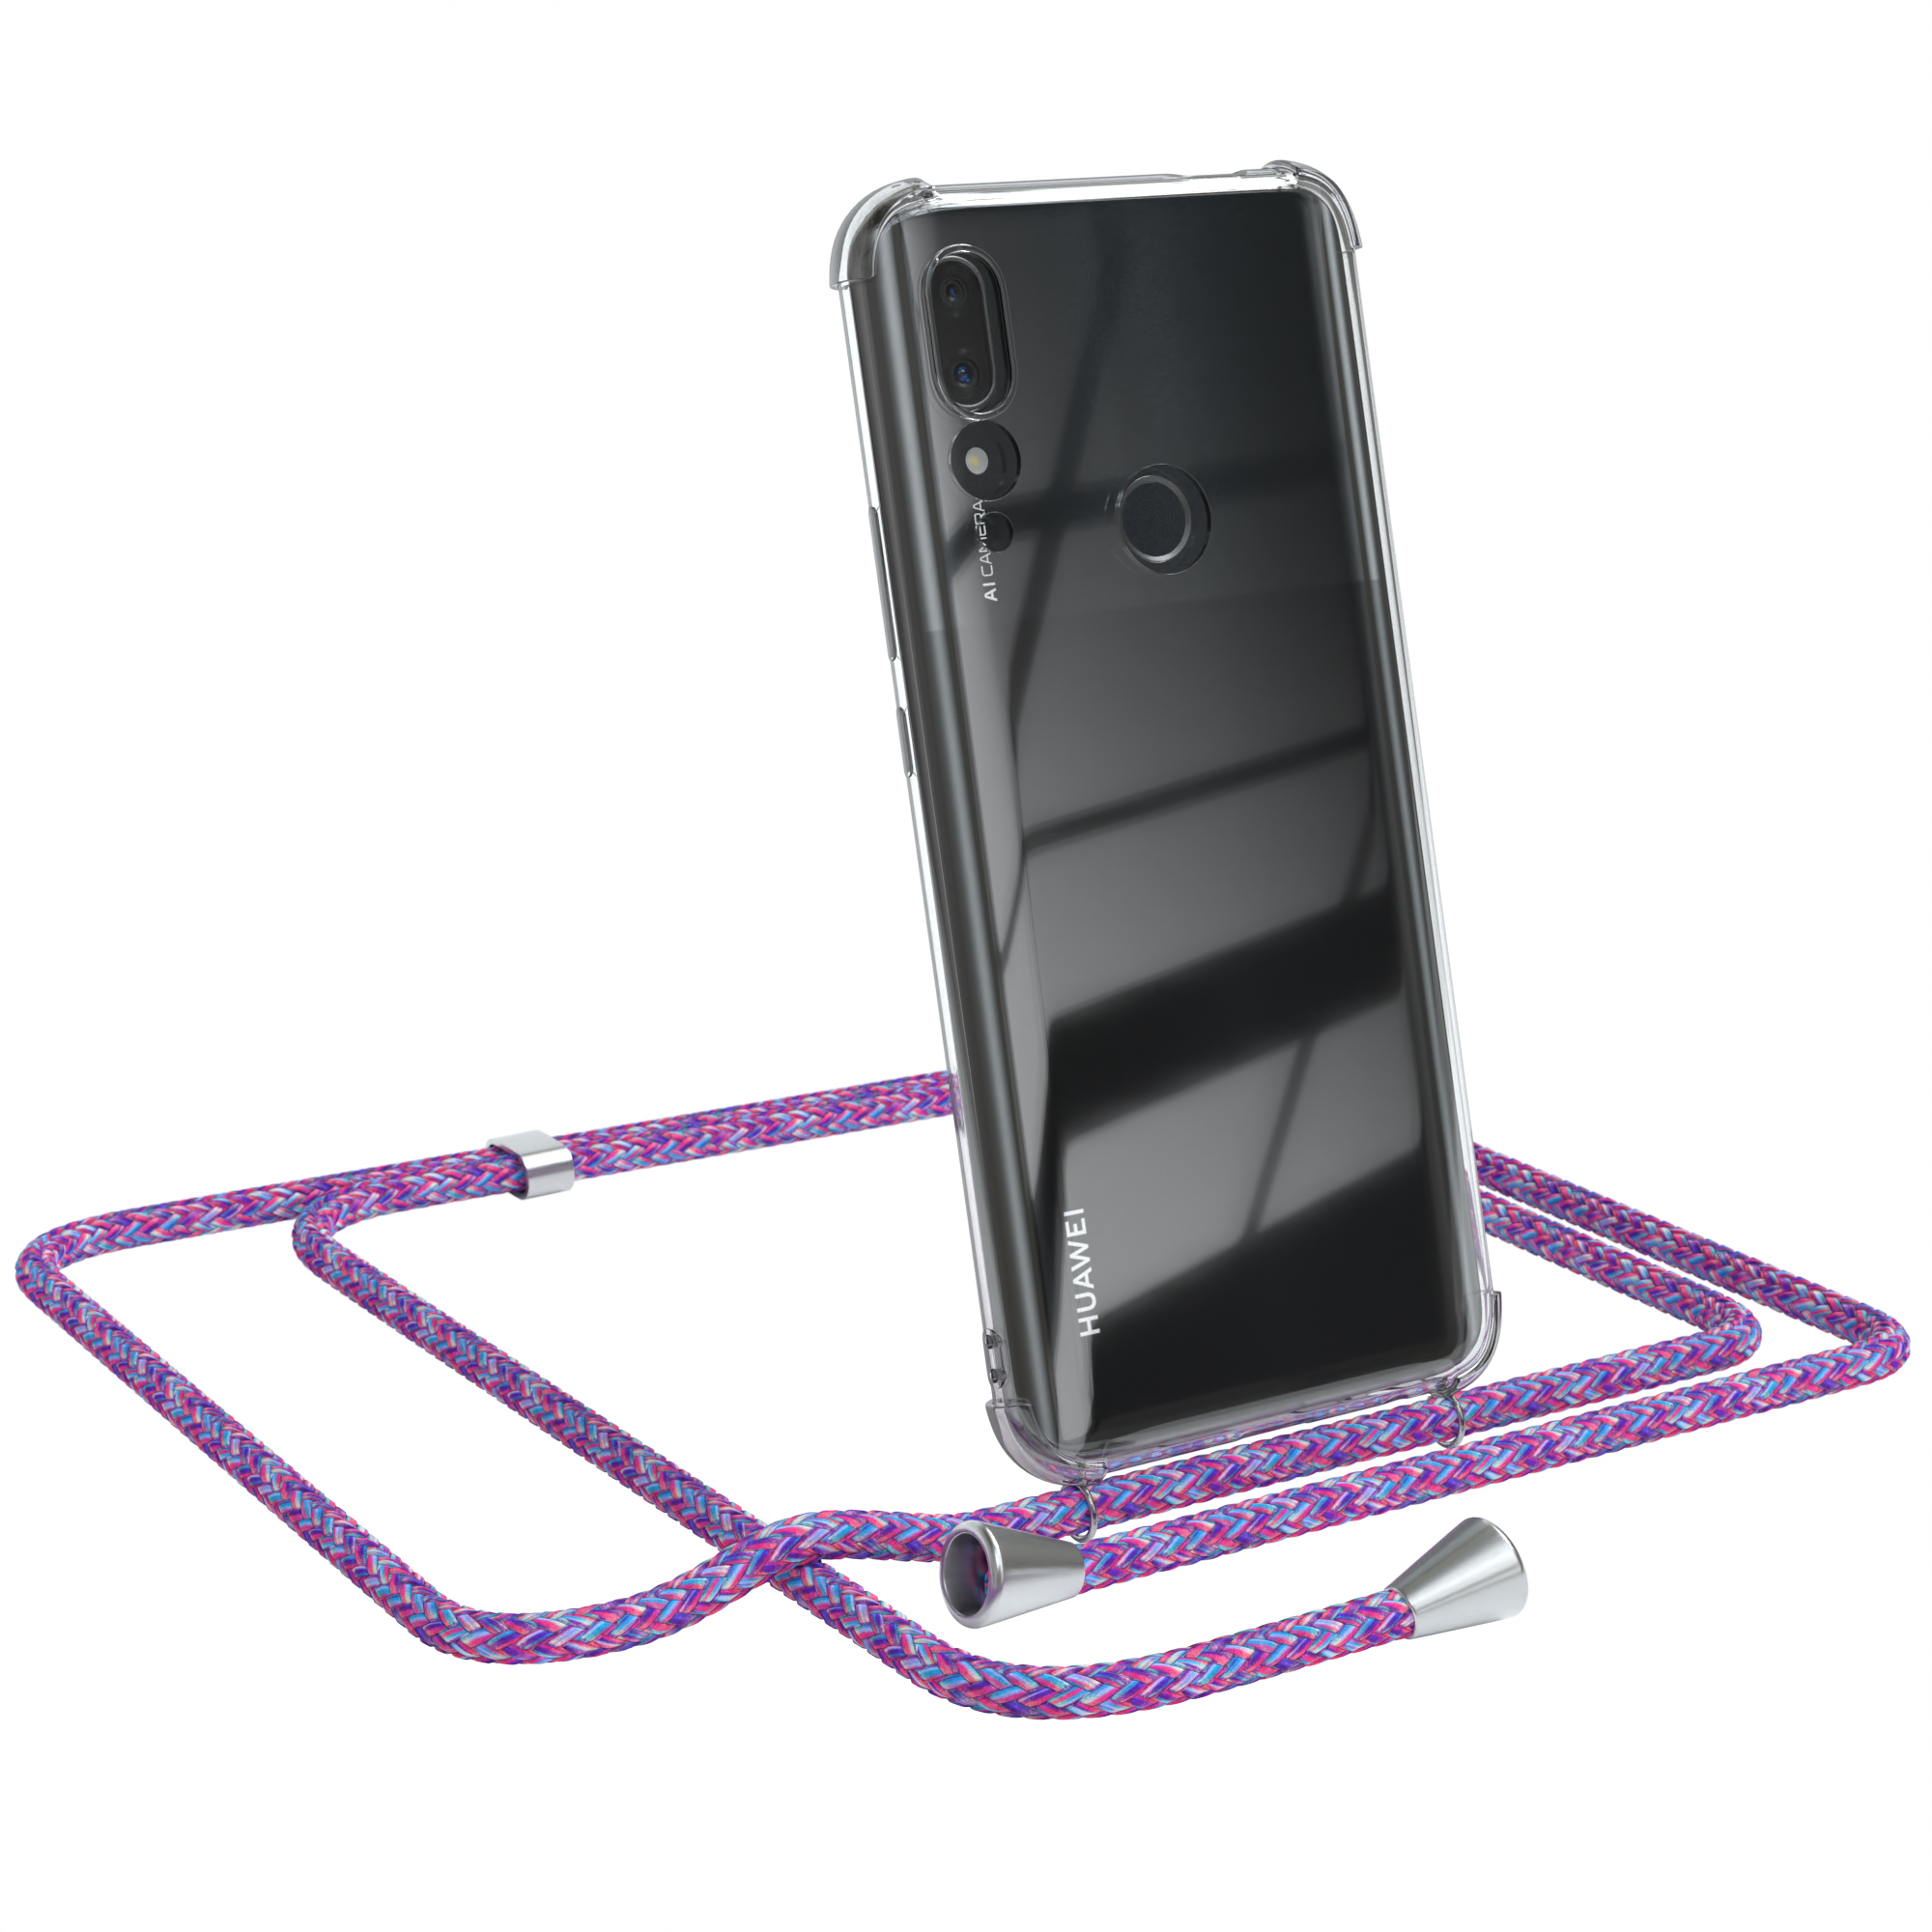 Silber Umhängetasche, Huawei, Clear P Prime / Lila Cover (2019), / CASE Clips Smart Umhängeband, Z mit Y9 EAZY